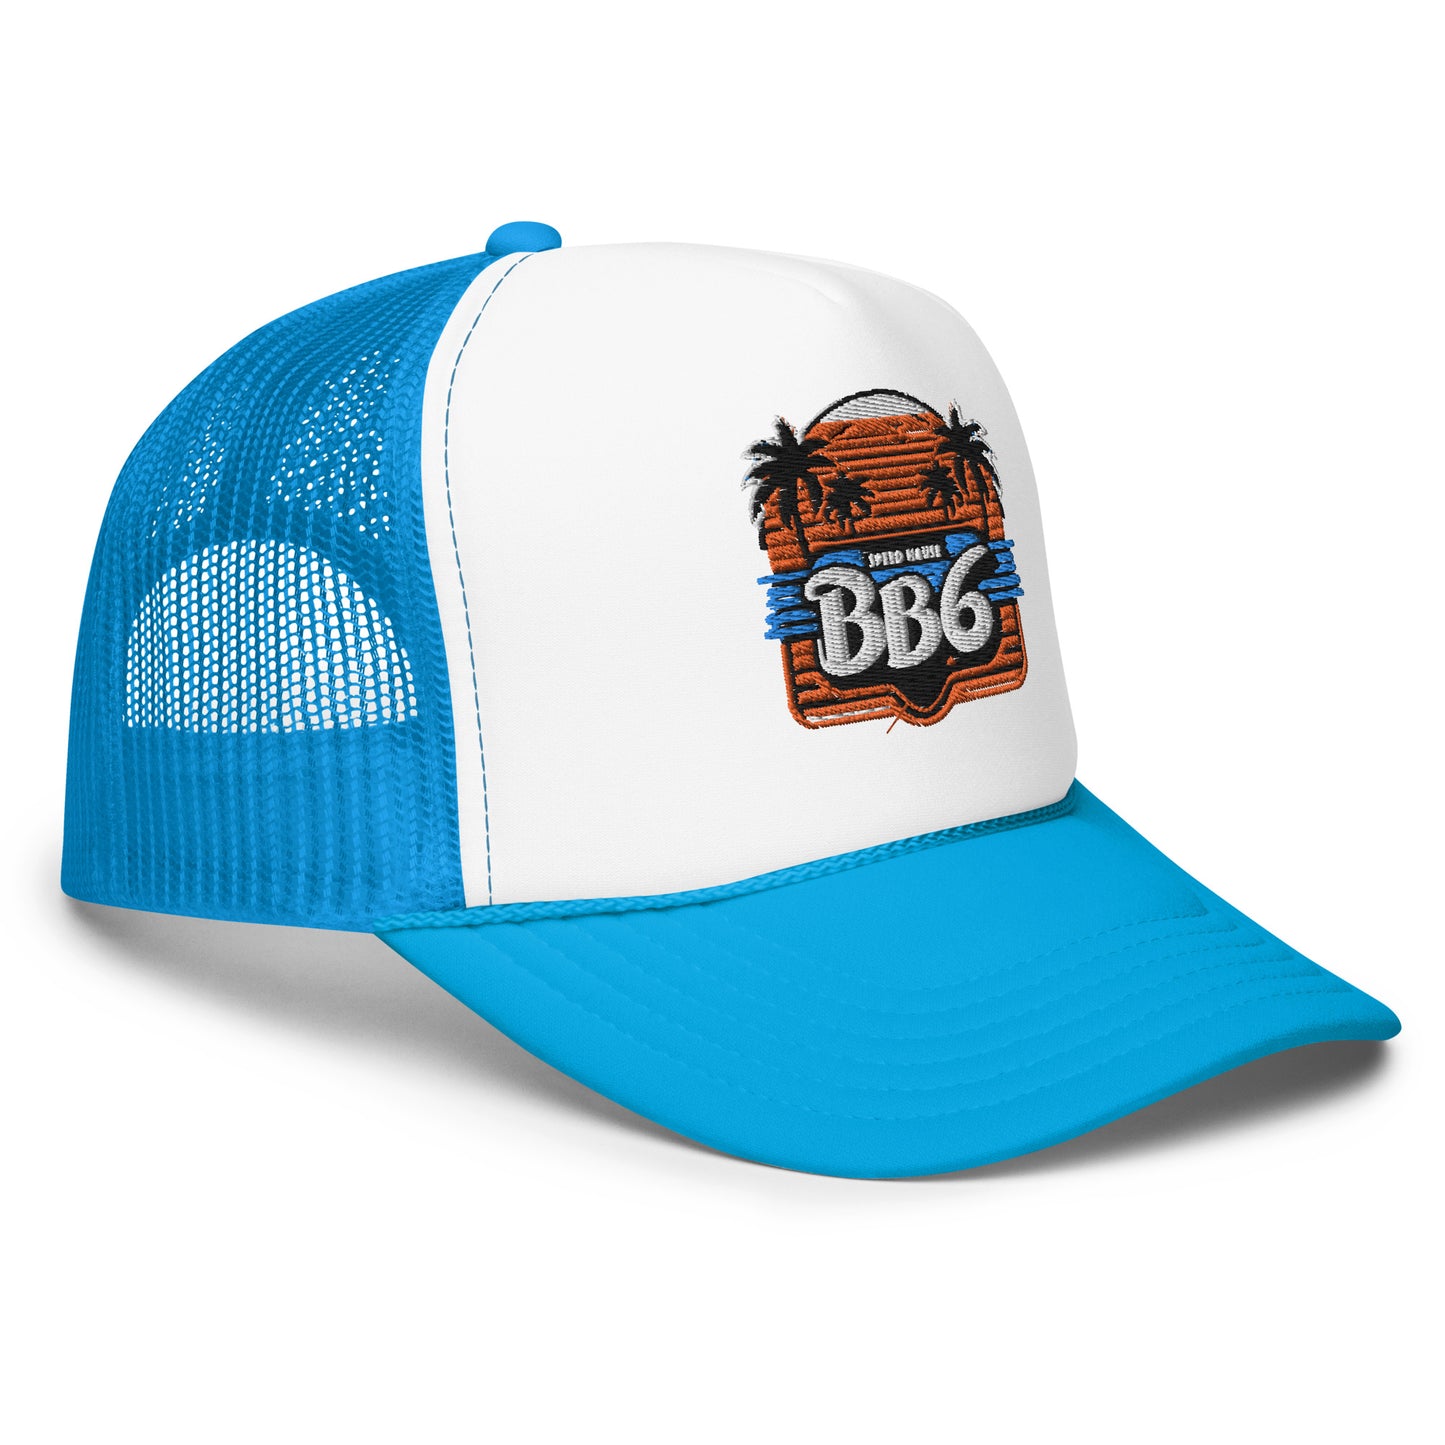 BB6 Embroidery trucker hat